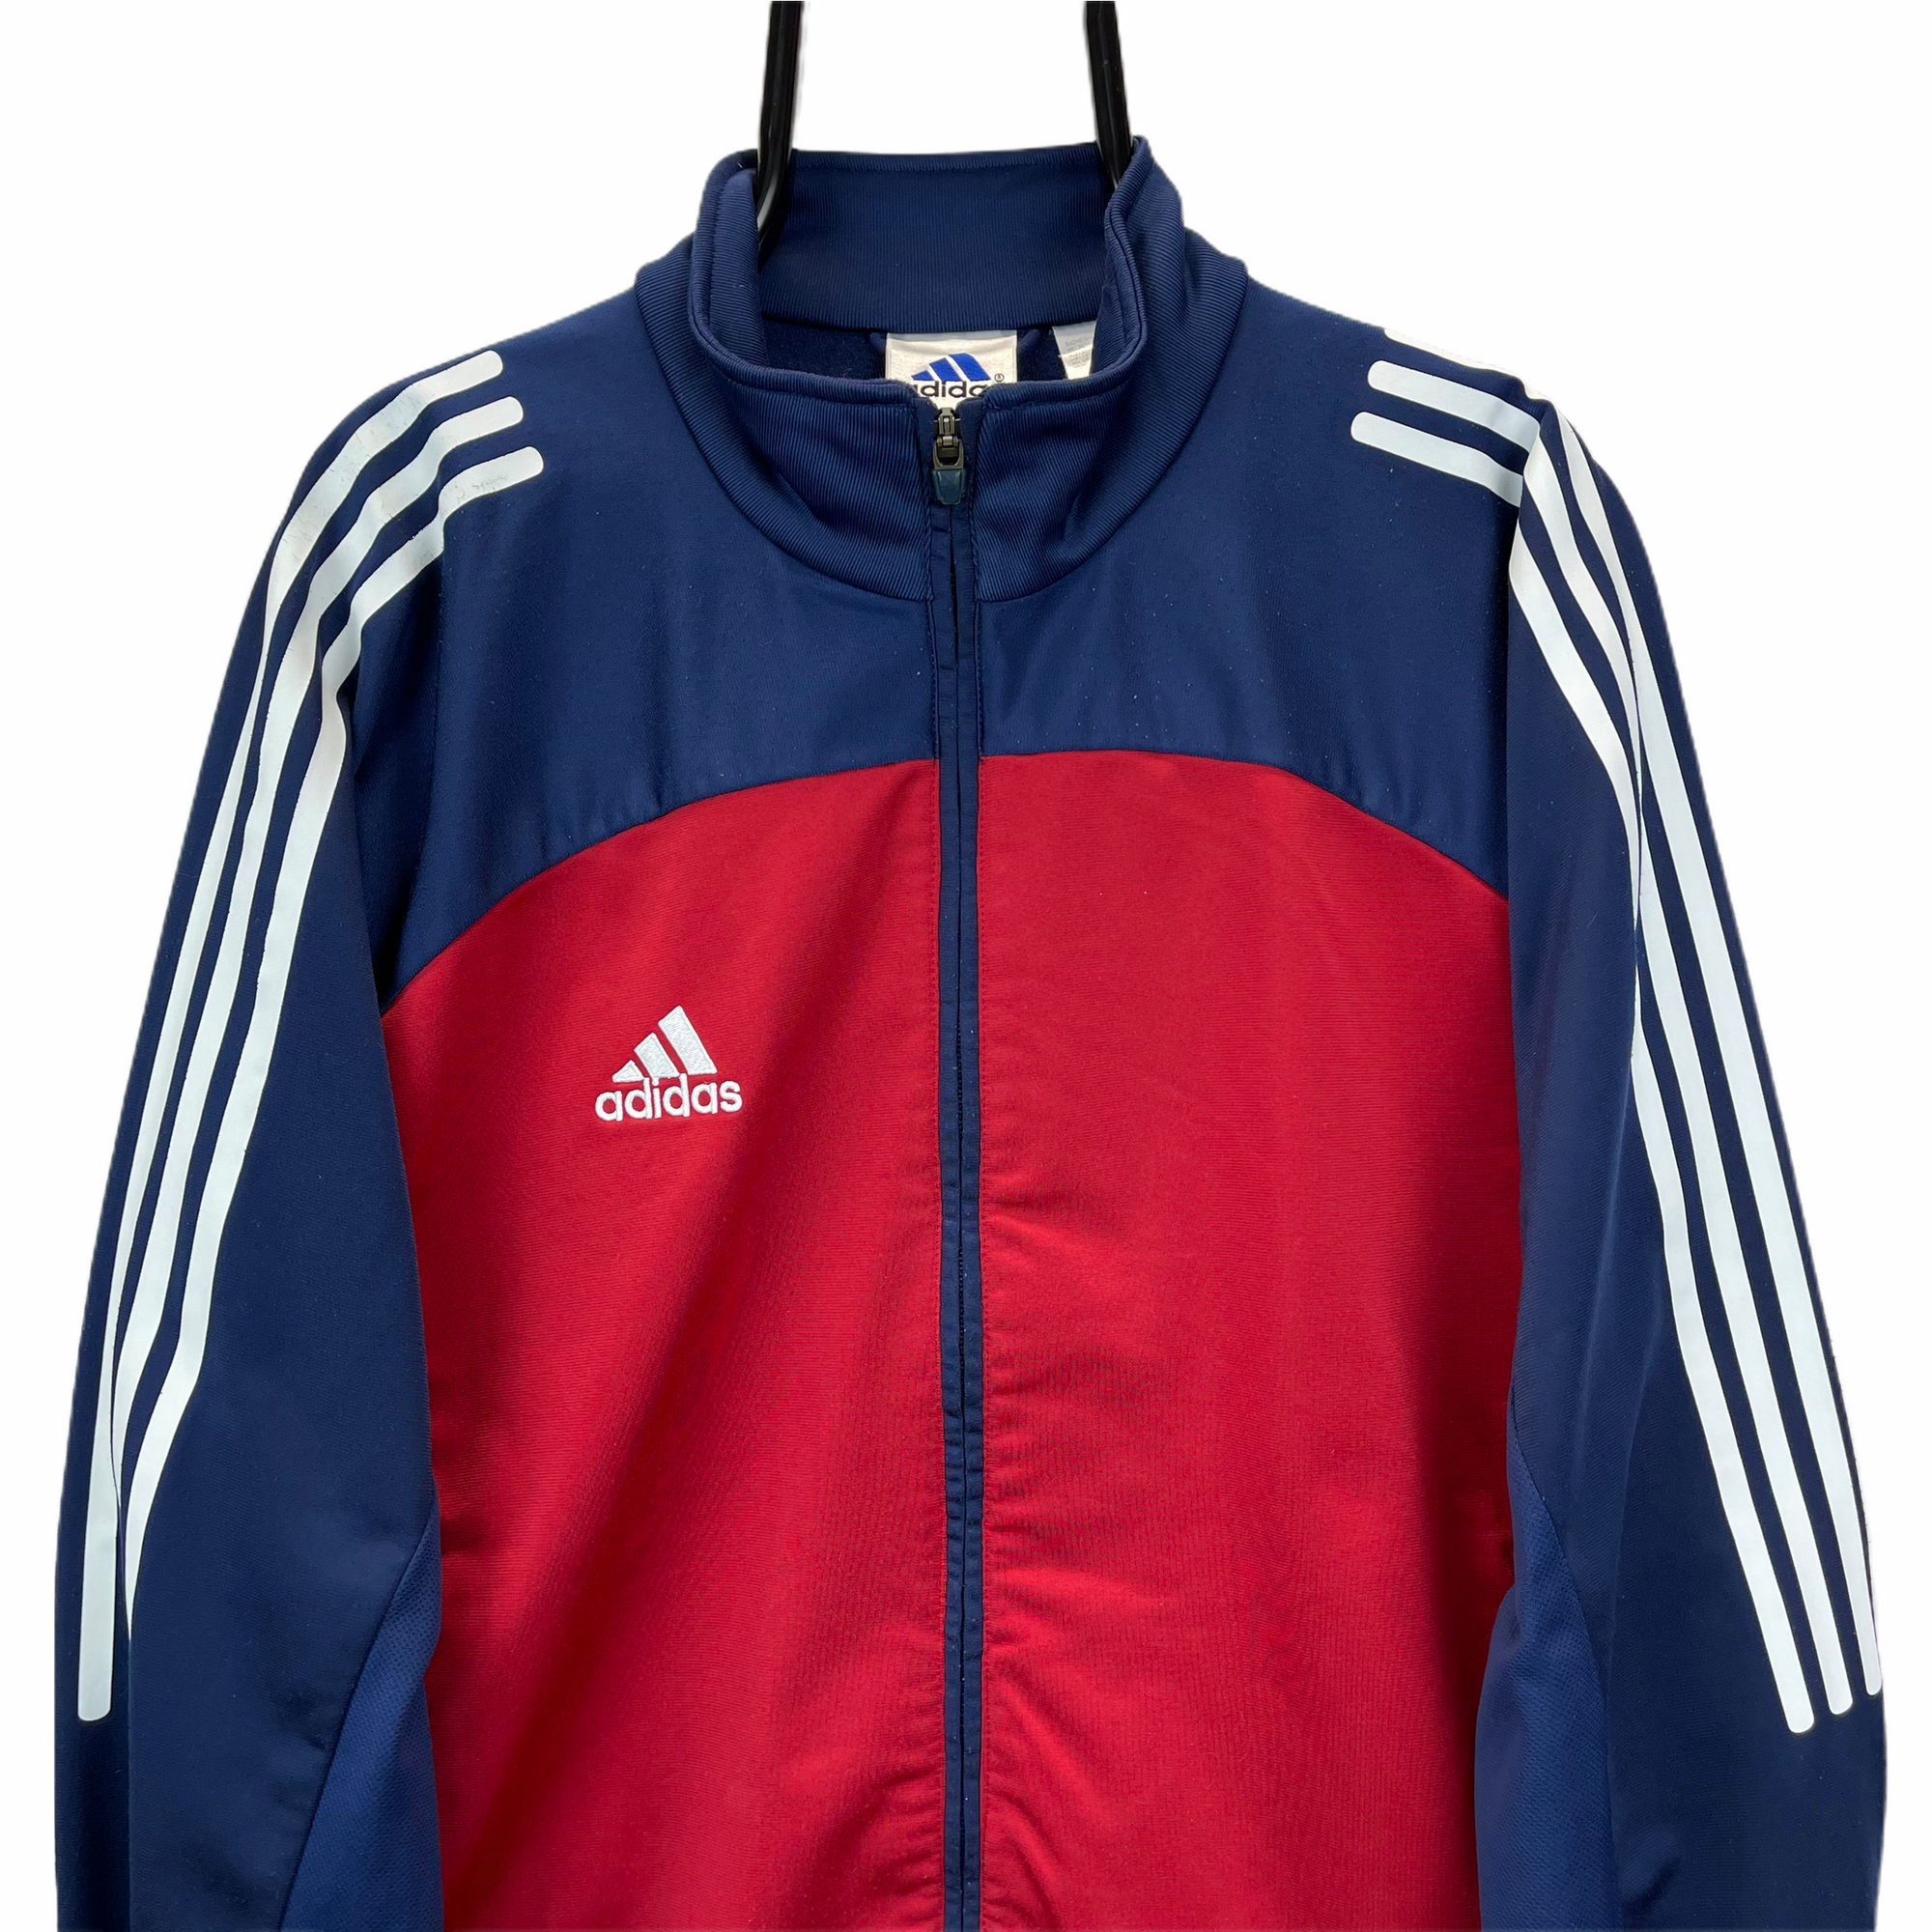 VINTAGE 90S ADIDAS TRACK JACKET IN NAVY & RED - MEN'S LARGE/WOMEN'S XL